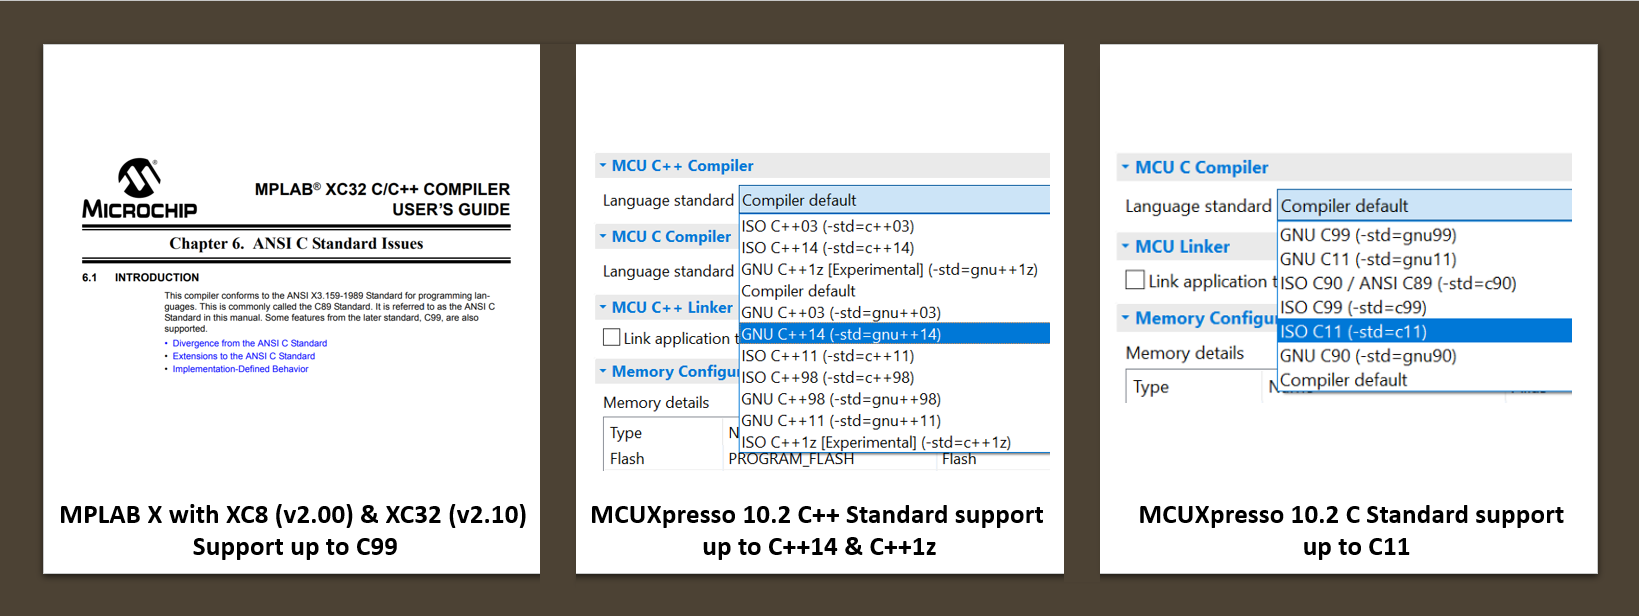 Comparison of C standards in MPLAB X and MCUXpresso (2018).